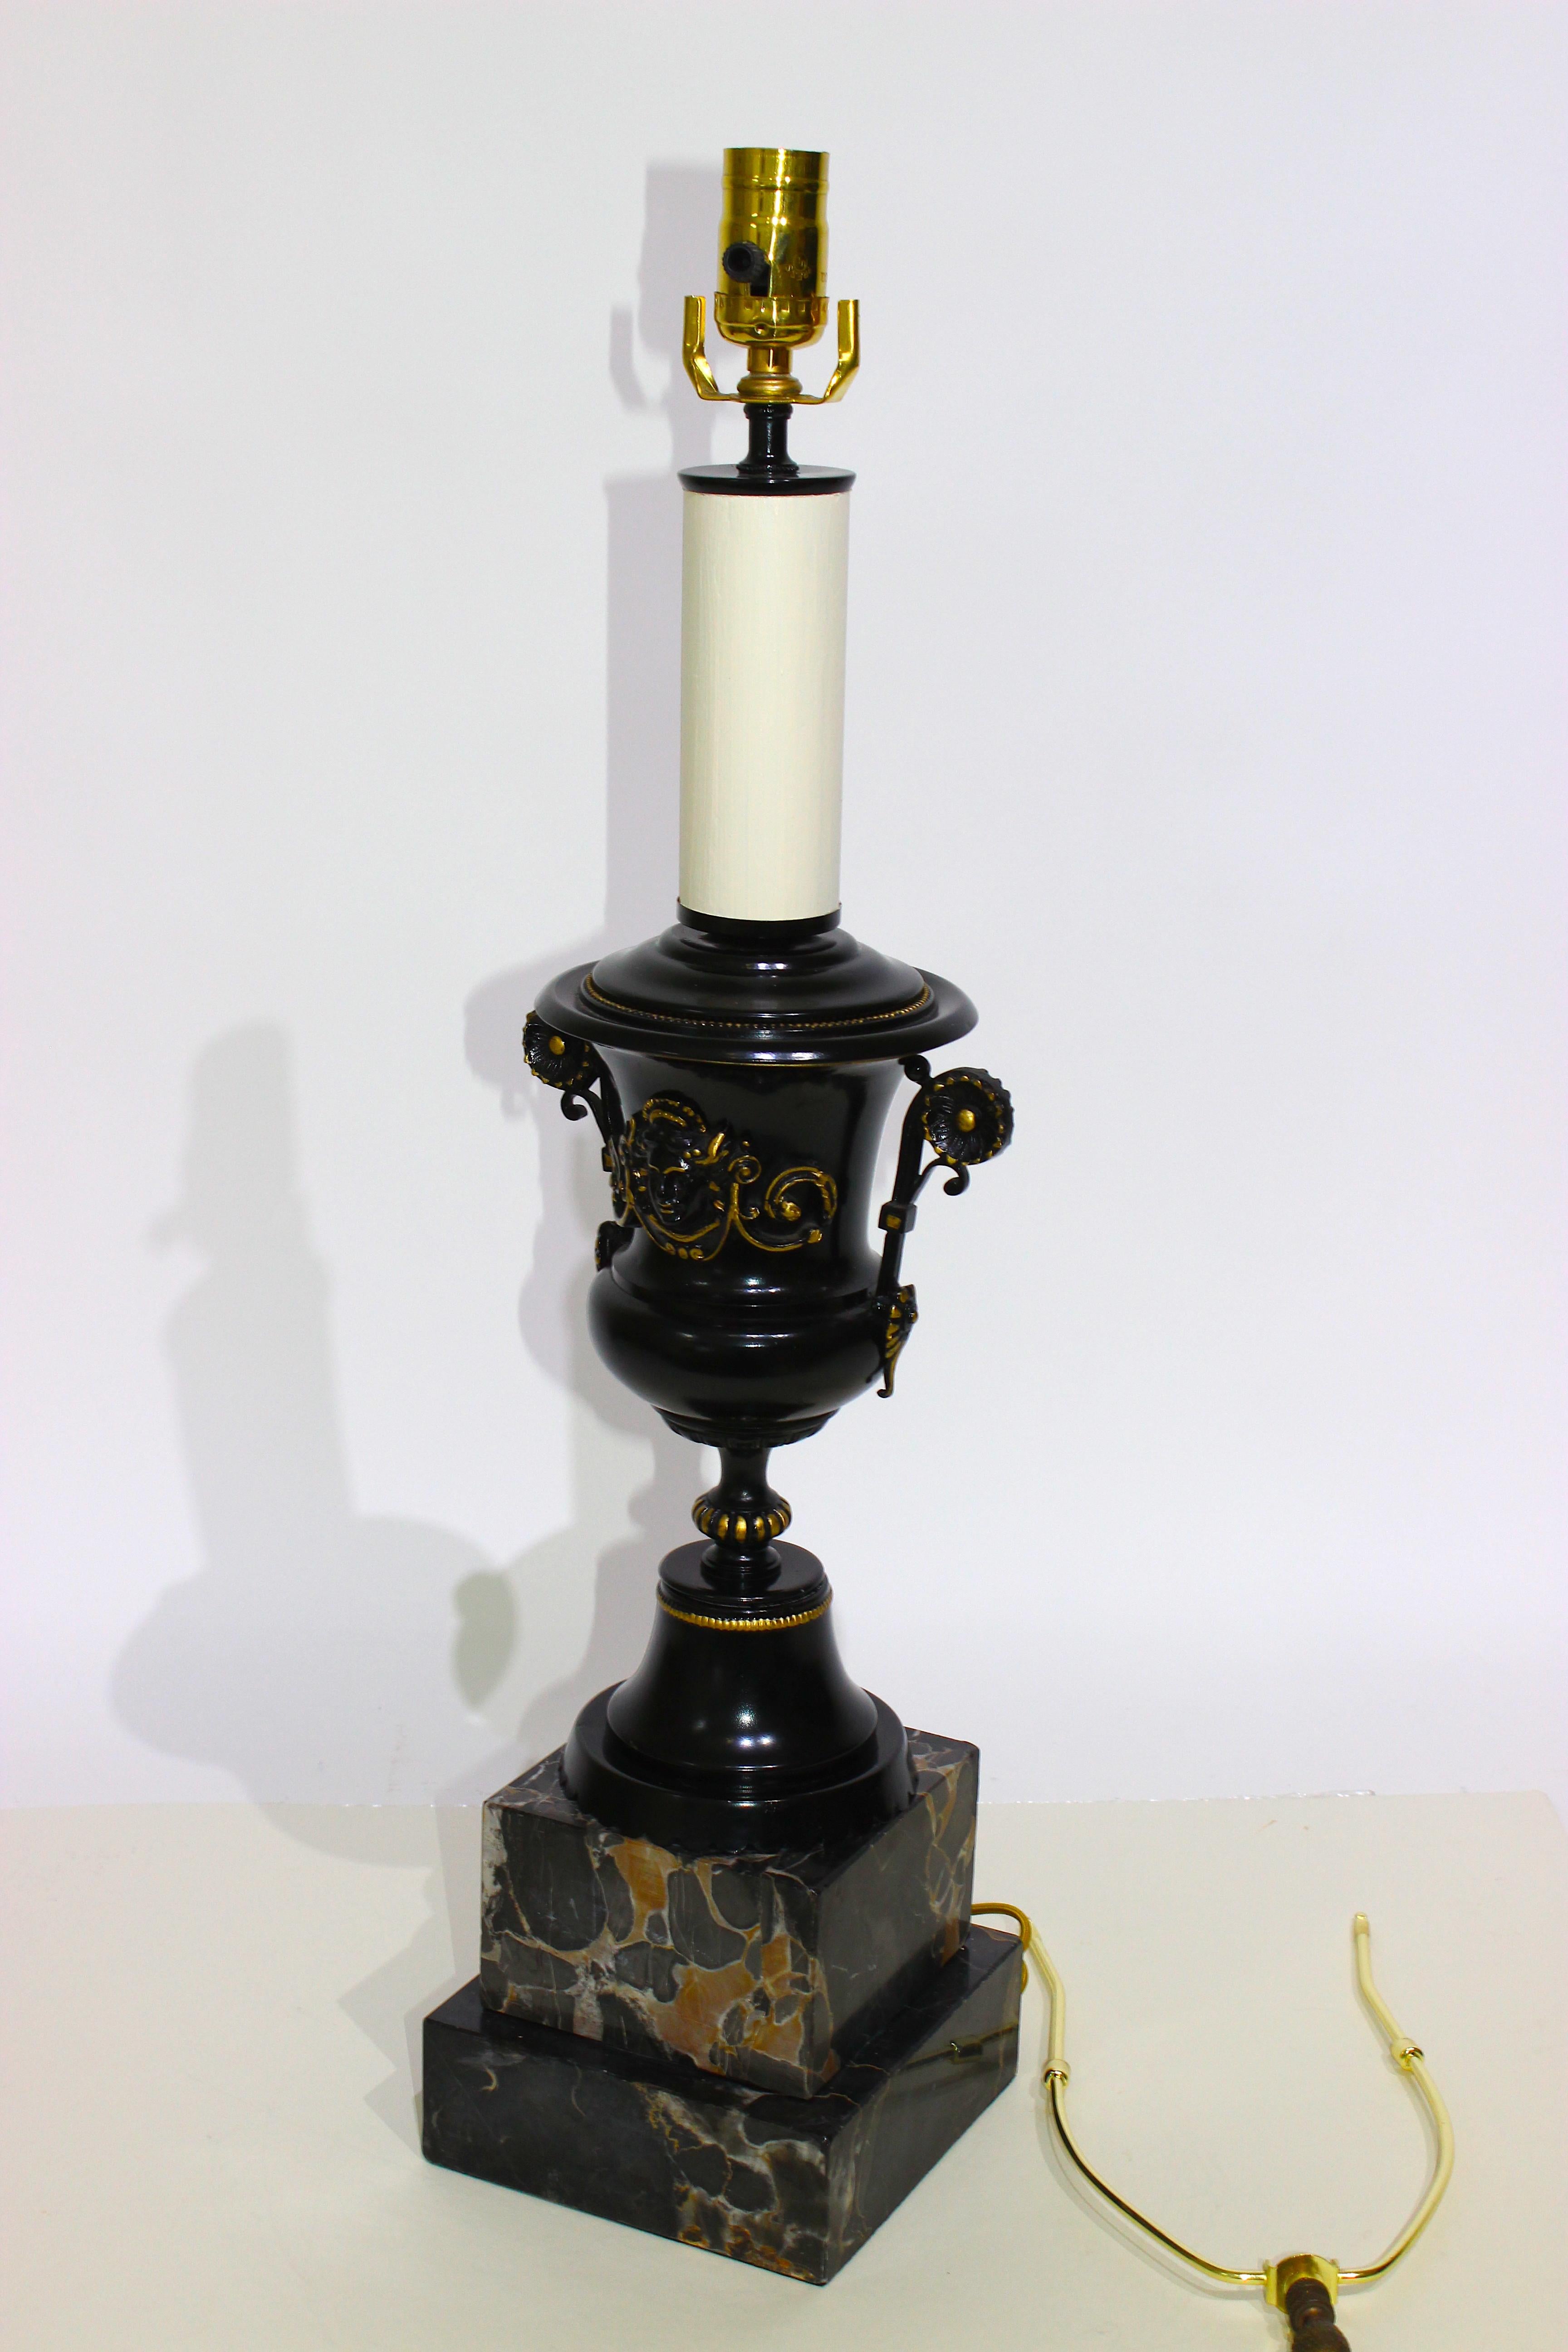 This stylish and dramatic Renaissance revival table lamp dates to the 1920s-1930s and it will make a statment with its enamel black finish.

Note: Height to the top of the socket is 26.25